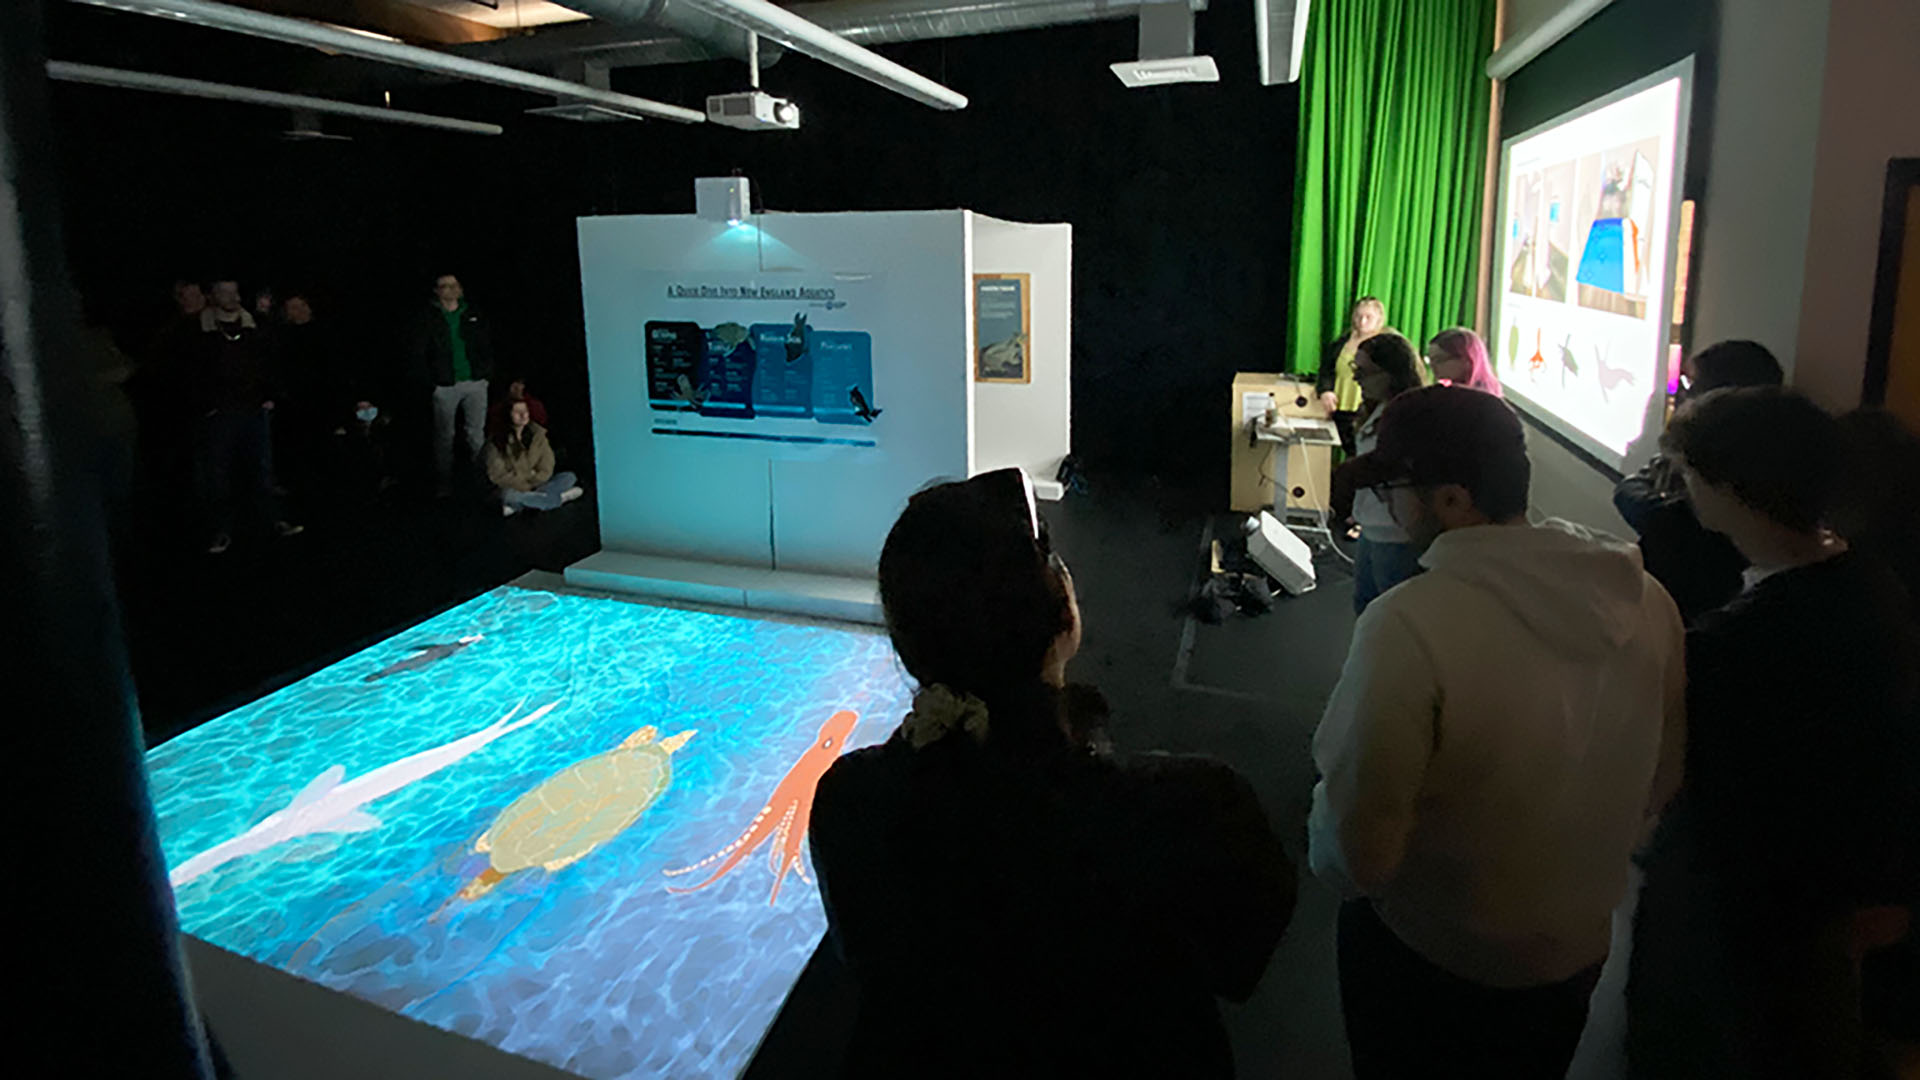 Students watch a projection on the floor of the Center for Media Production